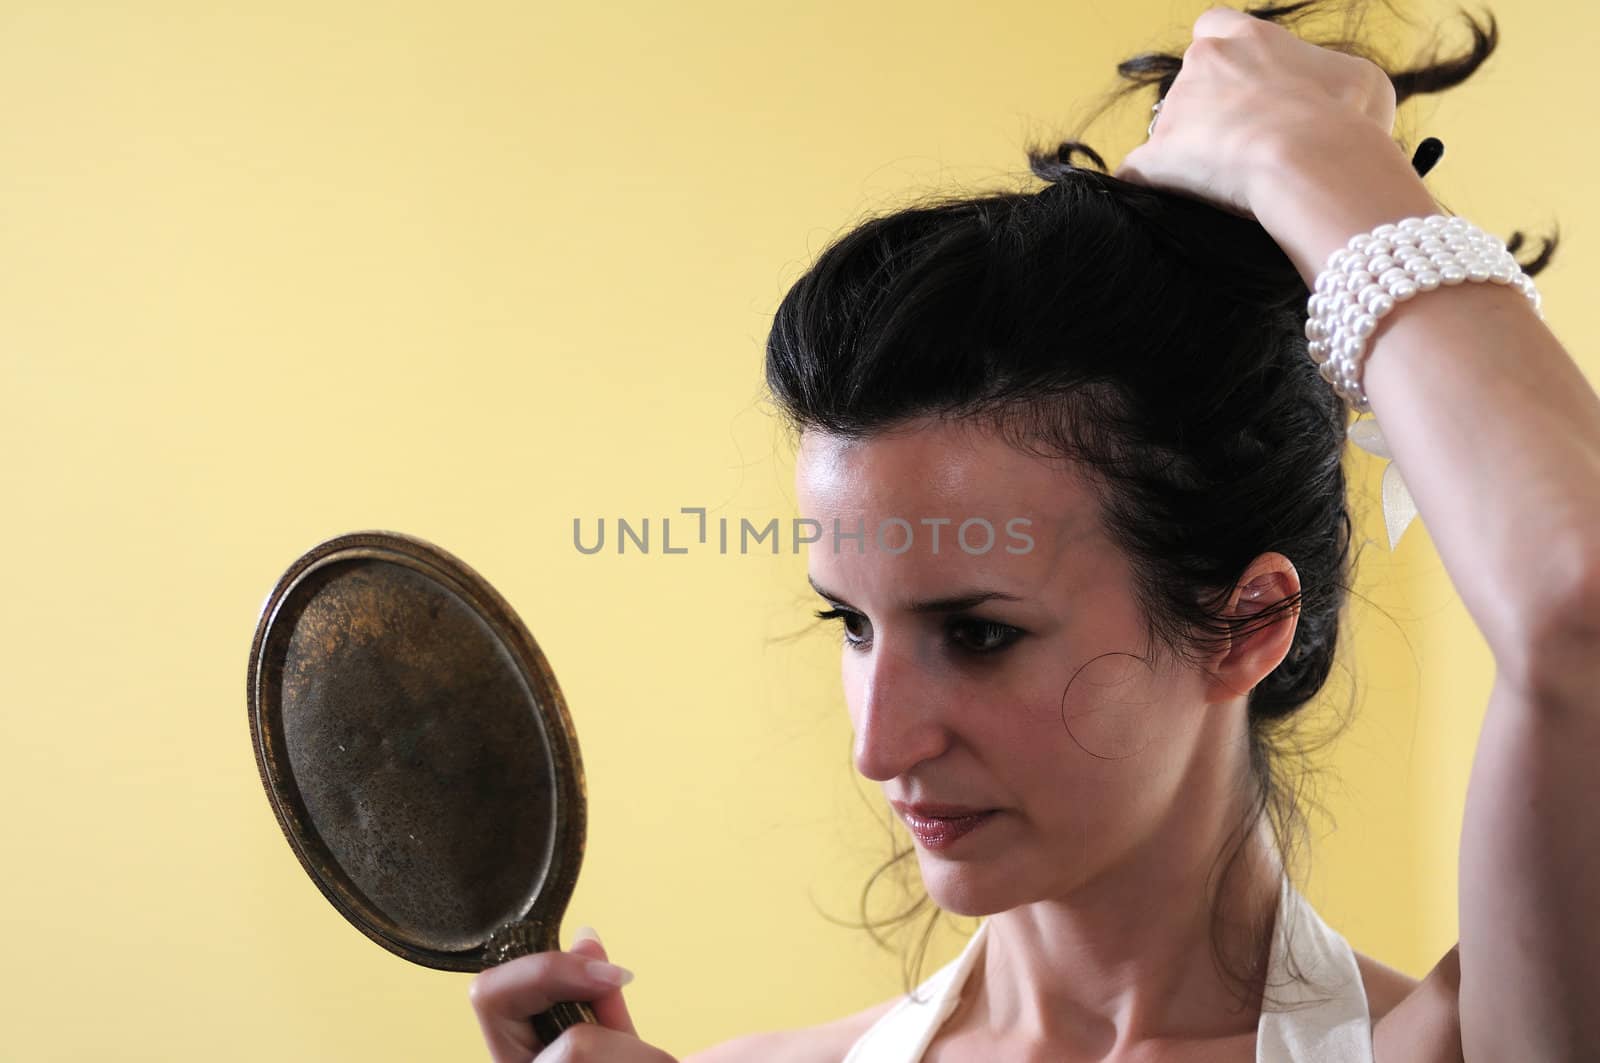 A young woman fixes her hair while gazing into an antique hand mirror.